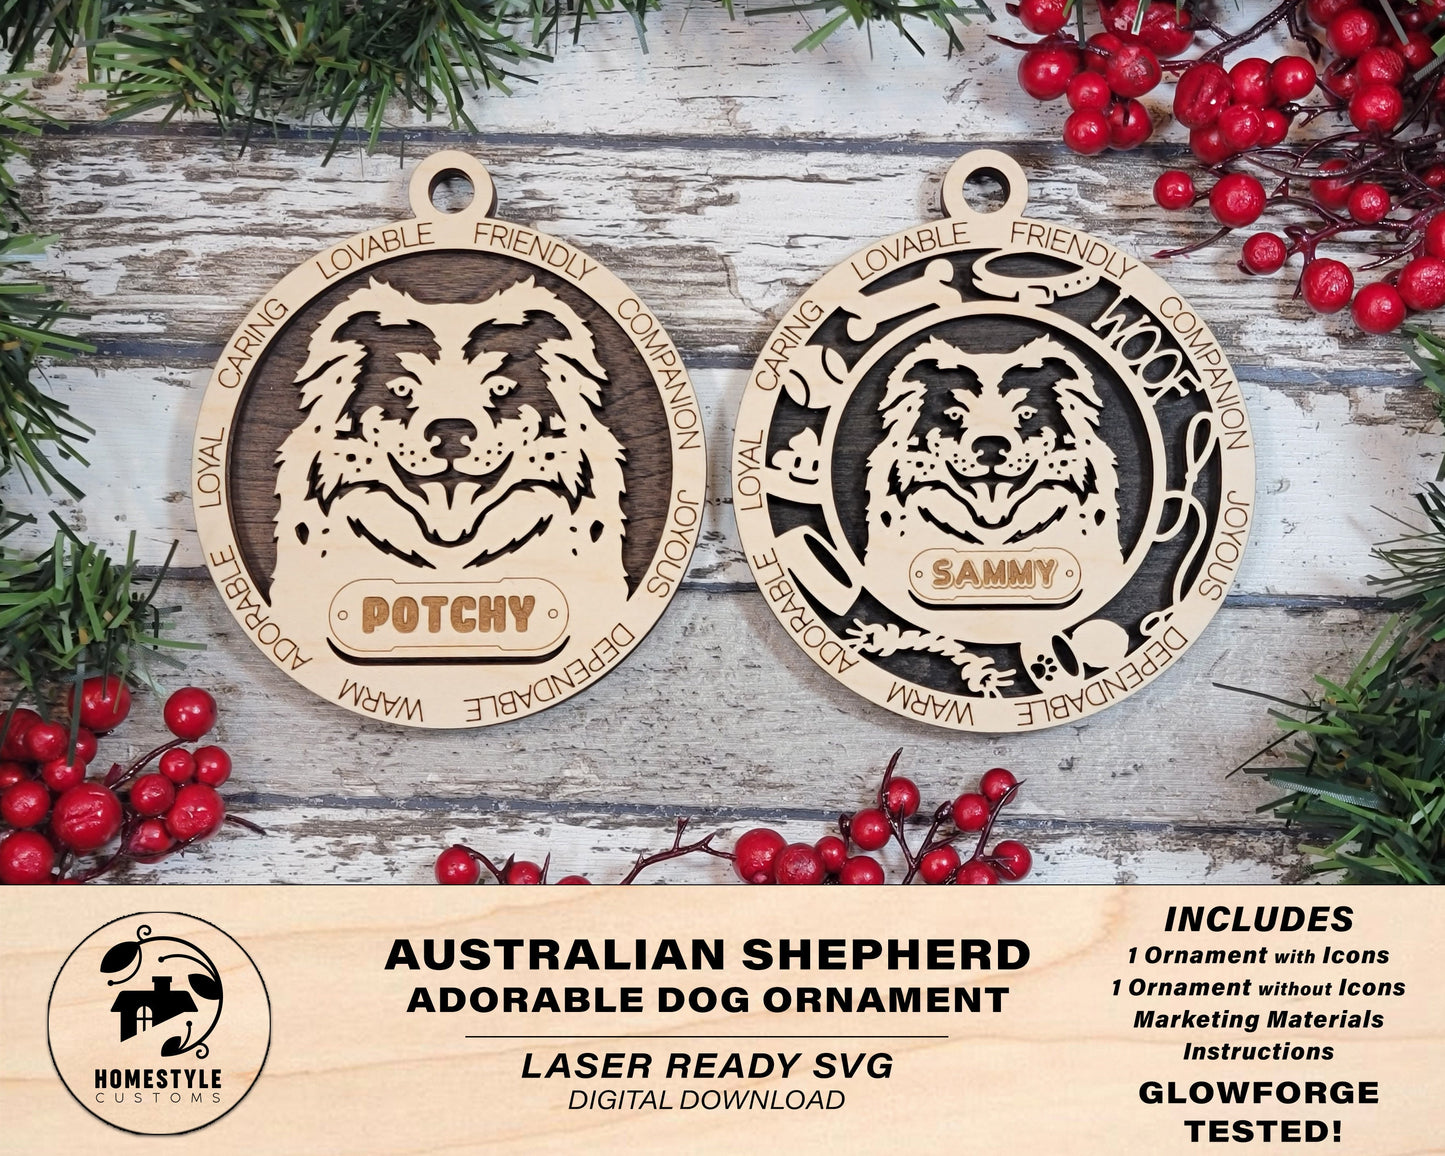 Australian Shepherd - Adorable Dog Ornaments - 2 Ornaments included - SVG, PDF, AI File Download - Sized for Glowforge